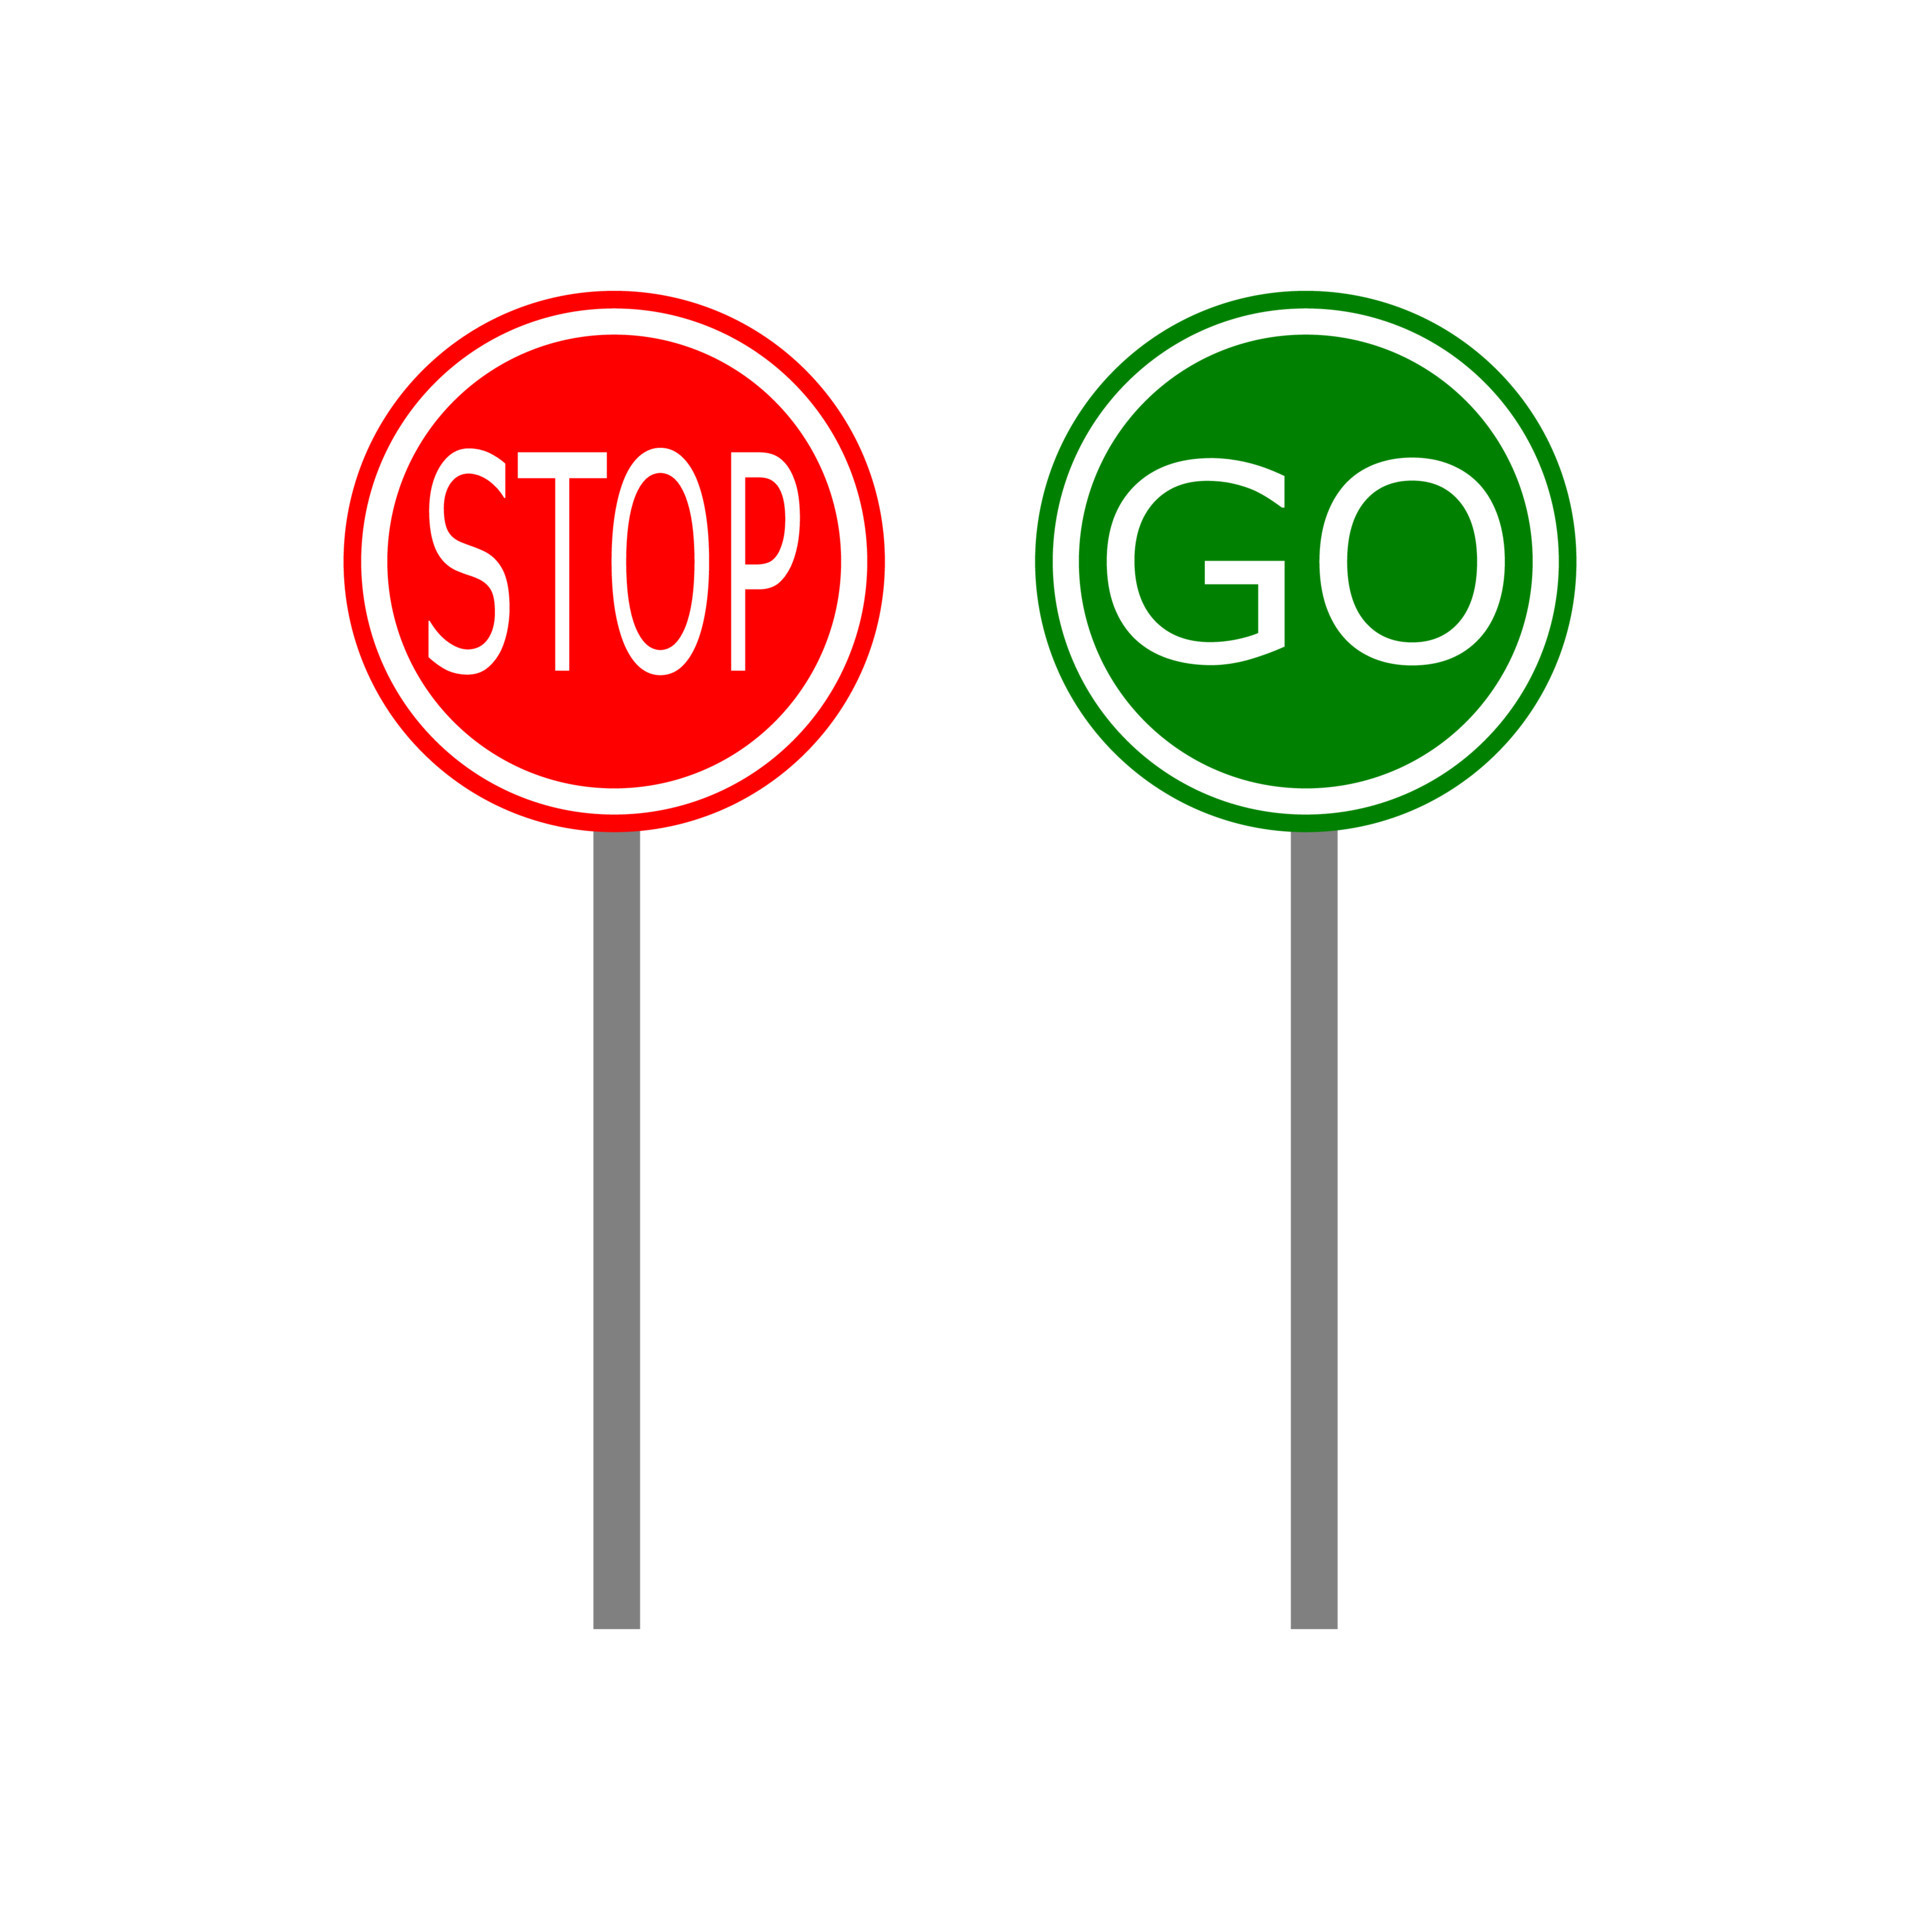 https://static.vecteezy.com/system/resources/previews/008/202/226/original/traffic-sign-stop-and-go-icon-on-white-background-free-vector.jpg